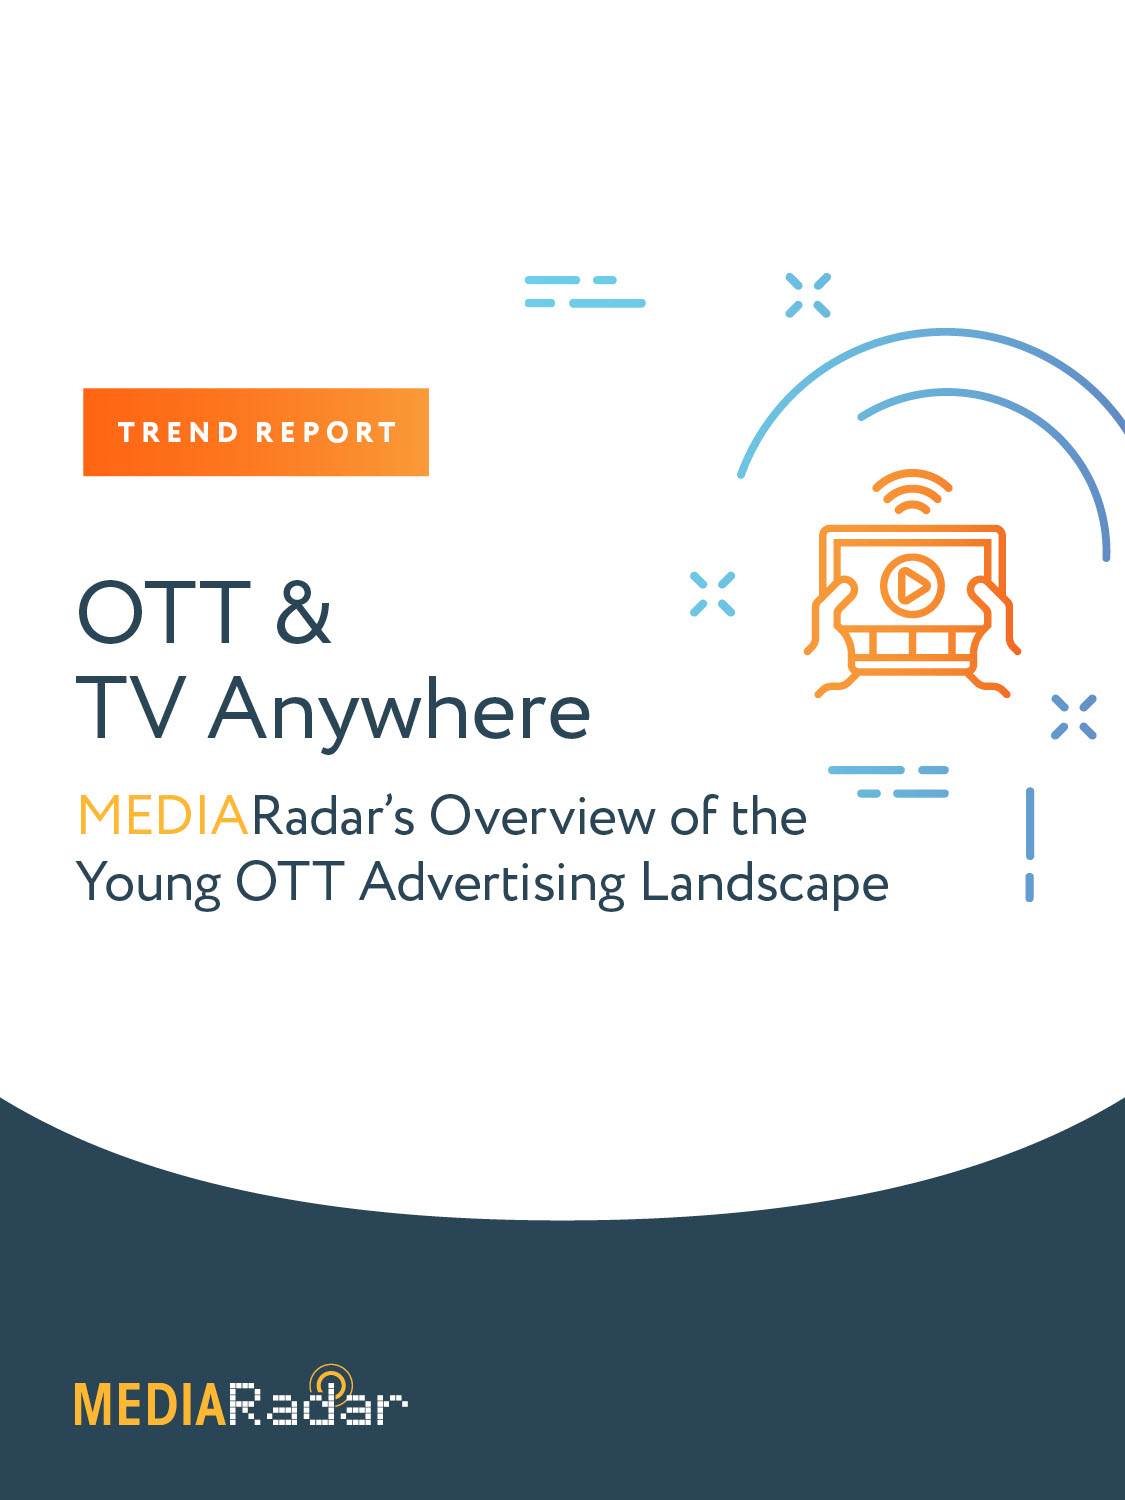 OTT & TV Anywhere: An Overview of the Young OTT Advertising Landscape